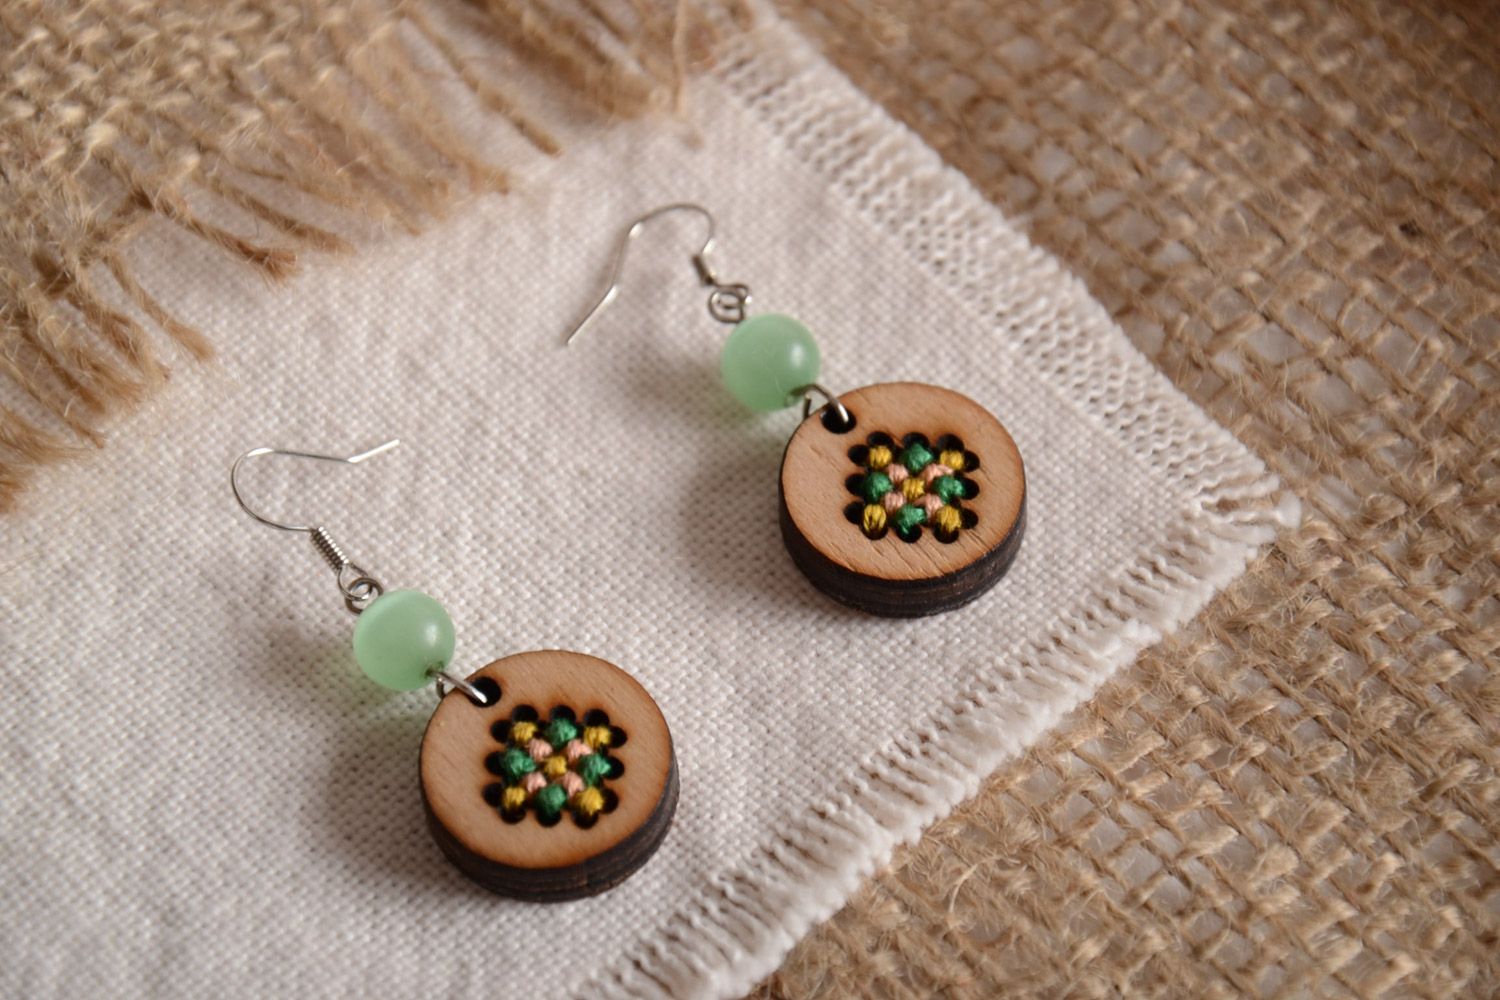 Handmade plywood earrings with cross stitch embroidery and beads in ethnic style photo 1